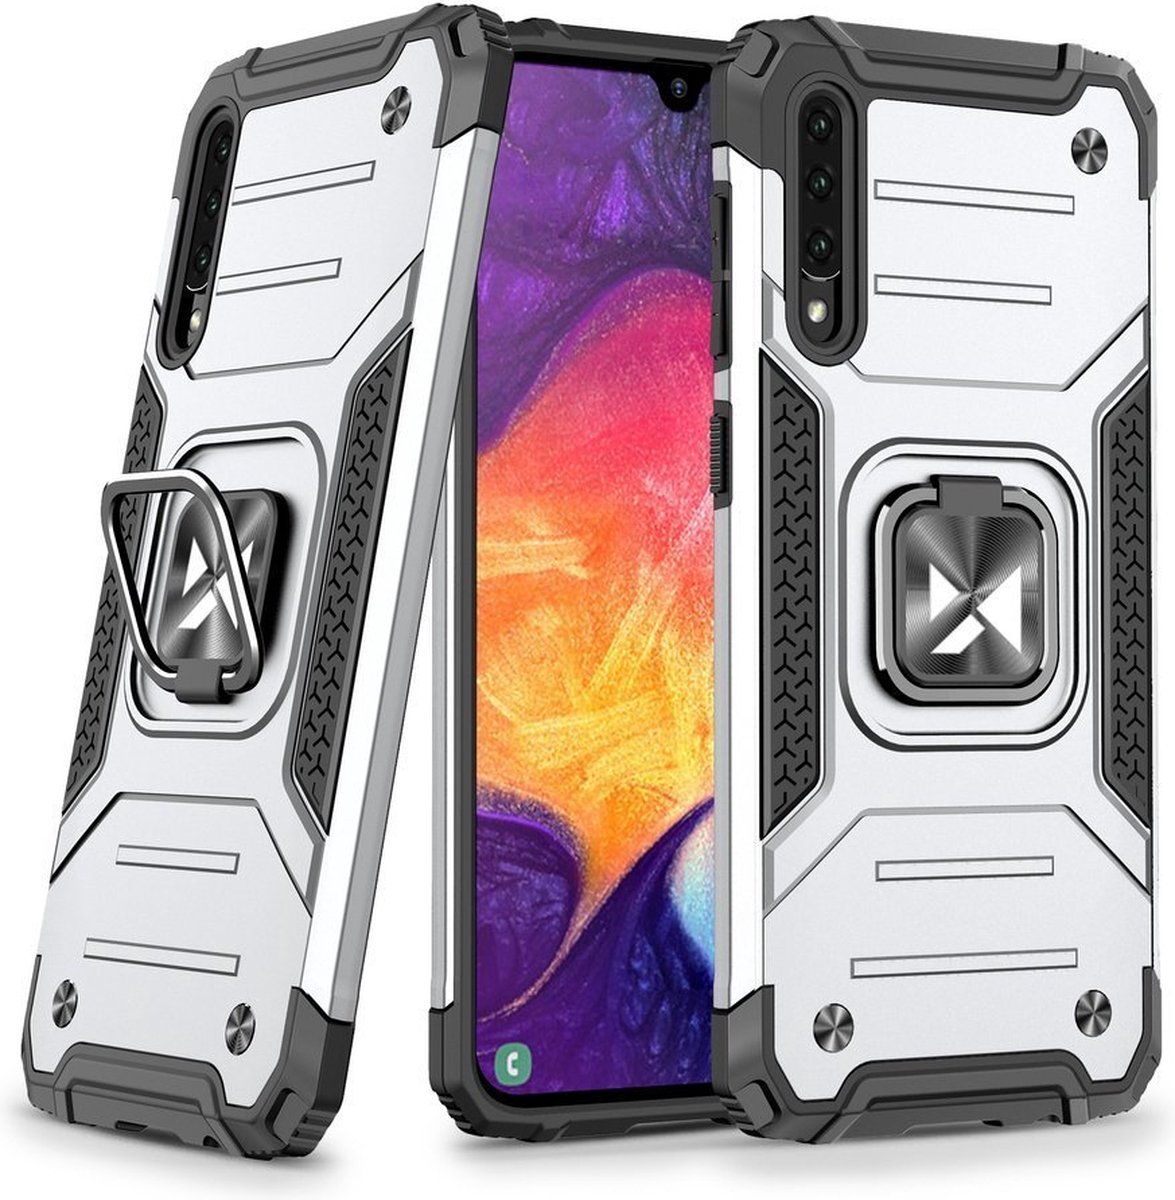 Wozinsky Ring Armor Case Kickstand Tough Rugged Cover voor Samsung Galaxy A51 zilver